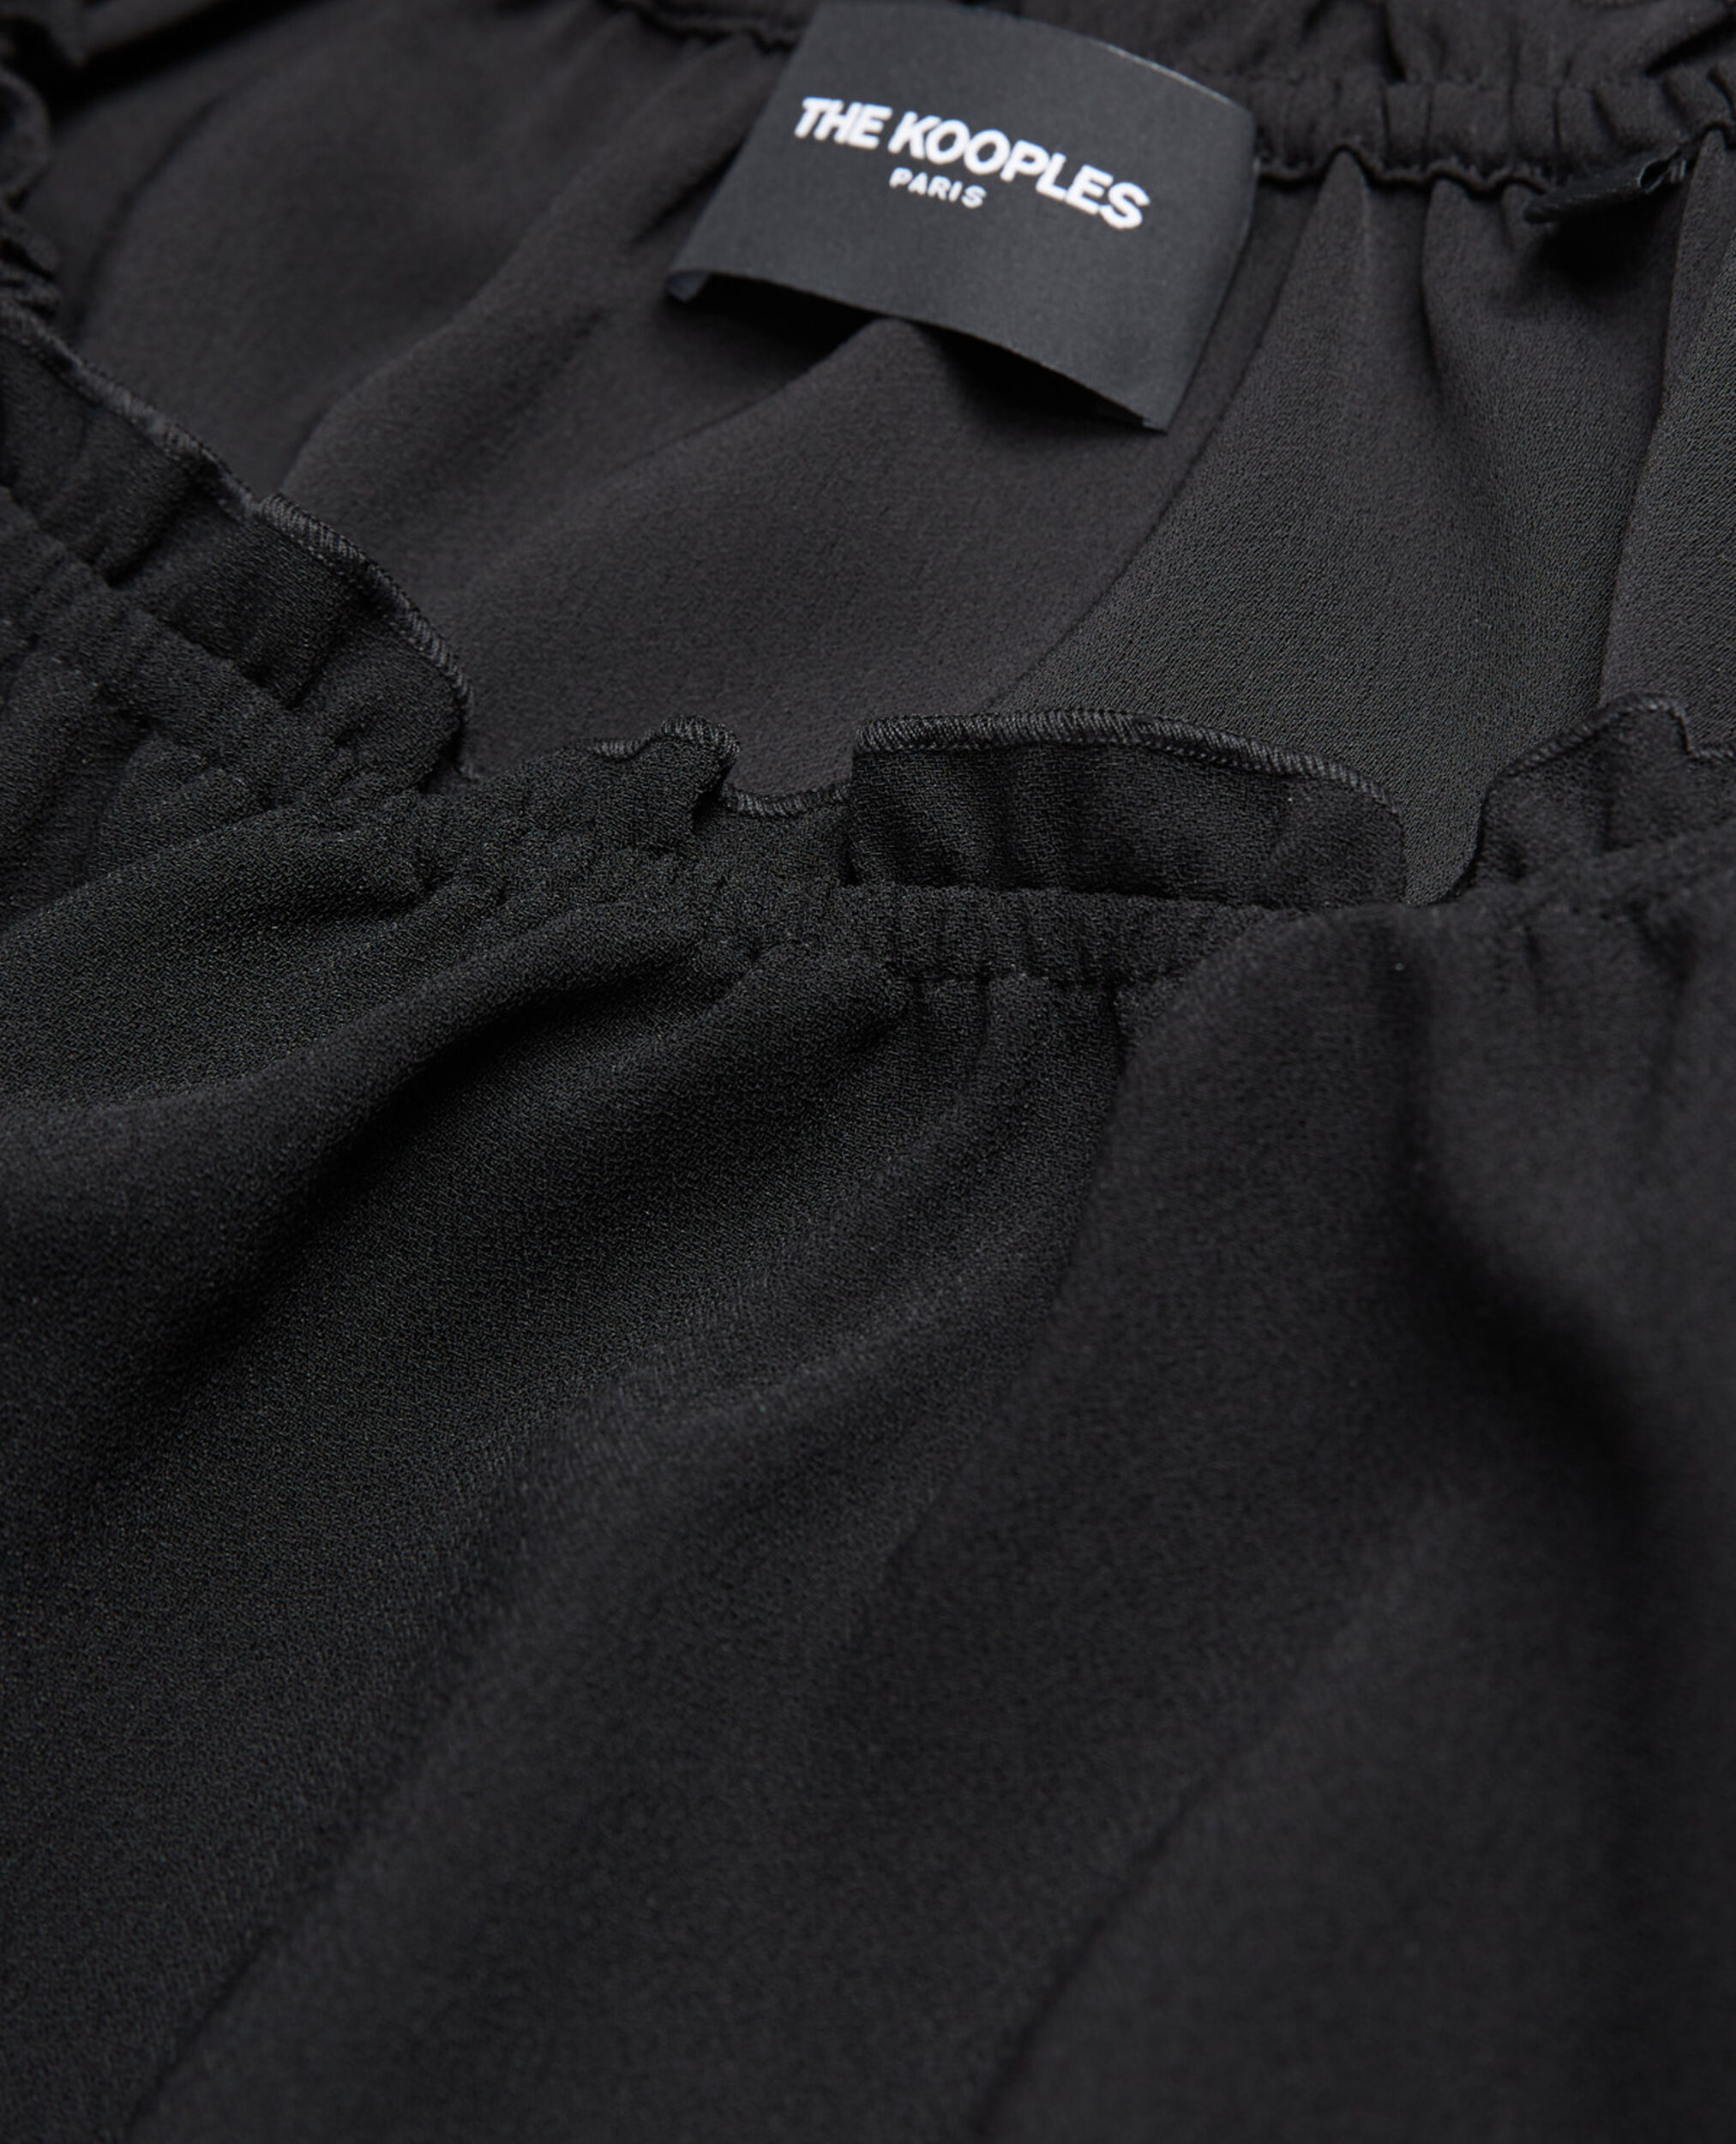 Black crepe top with short puffed sleeves, BLACK, hi-res image number null